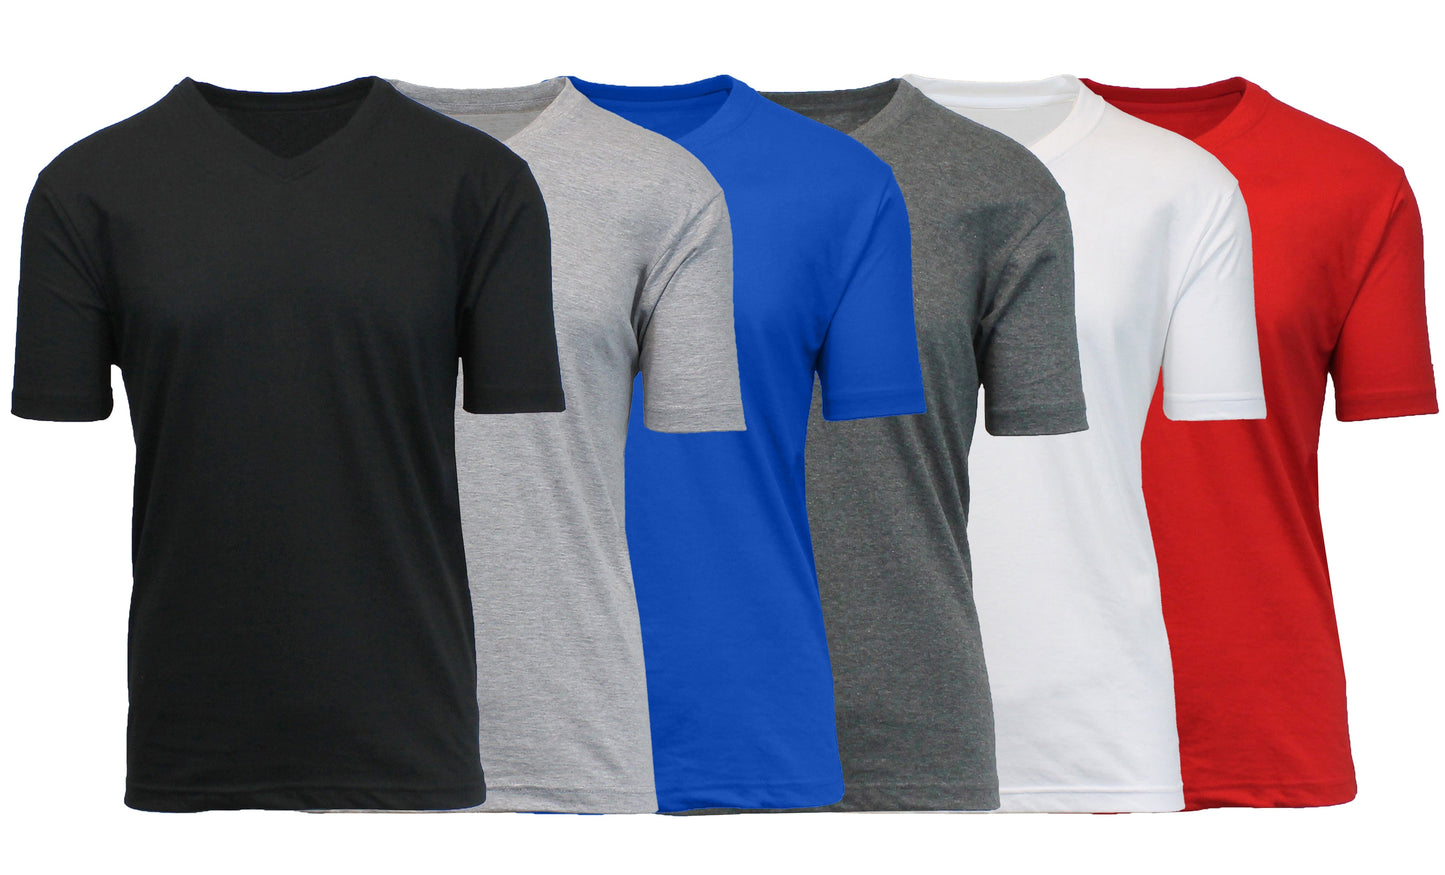 (6-Pack) Short Sleeve V-Neck Modern Fit Classic Tees (S-3XL) - GalaxybyHarvic